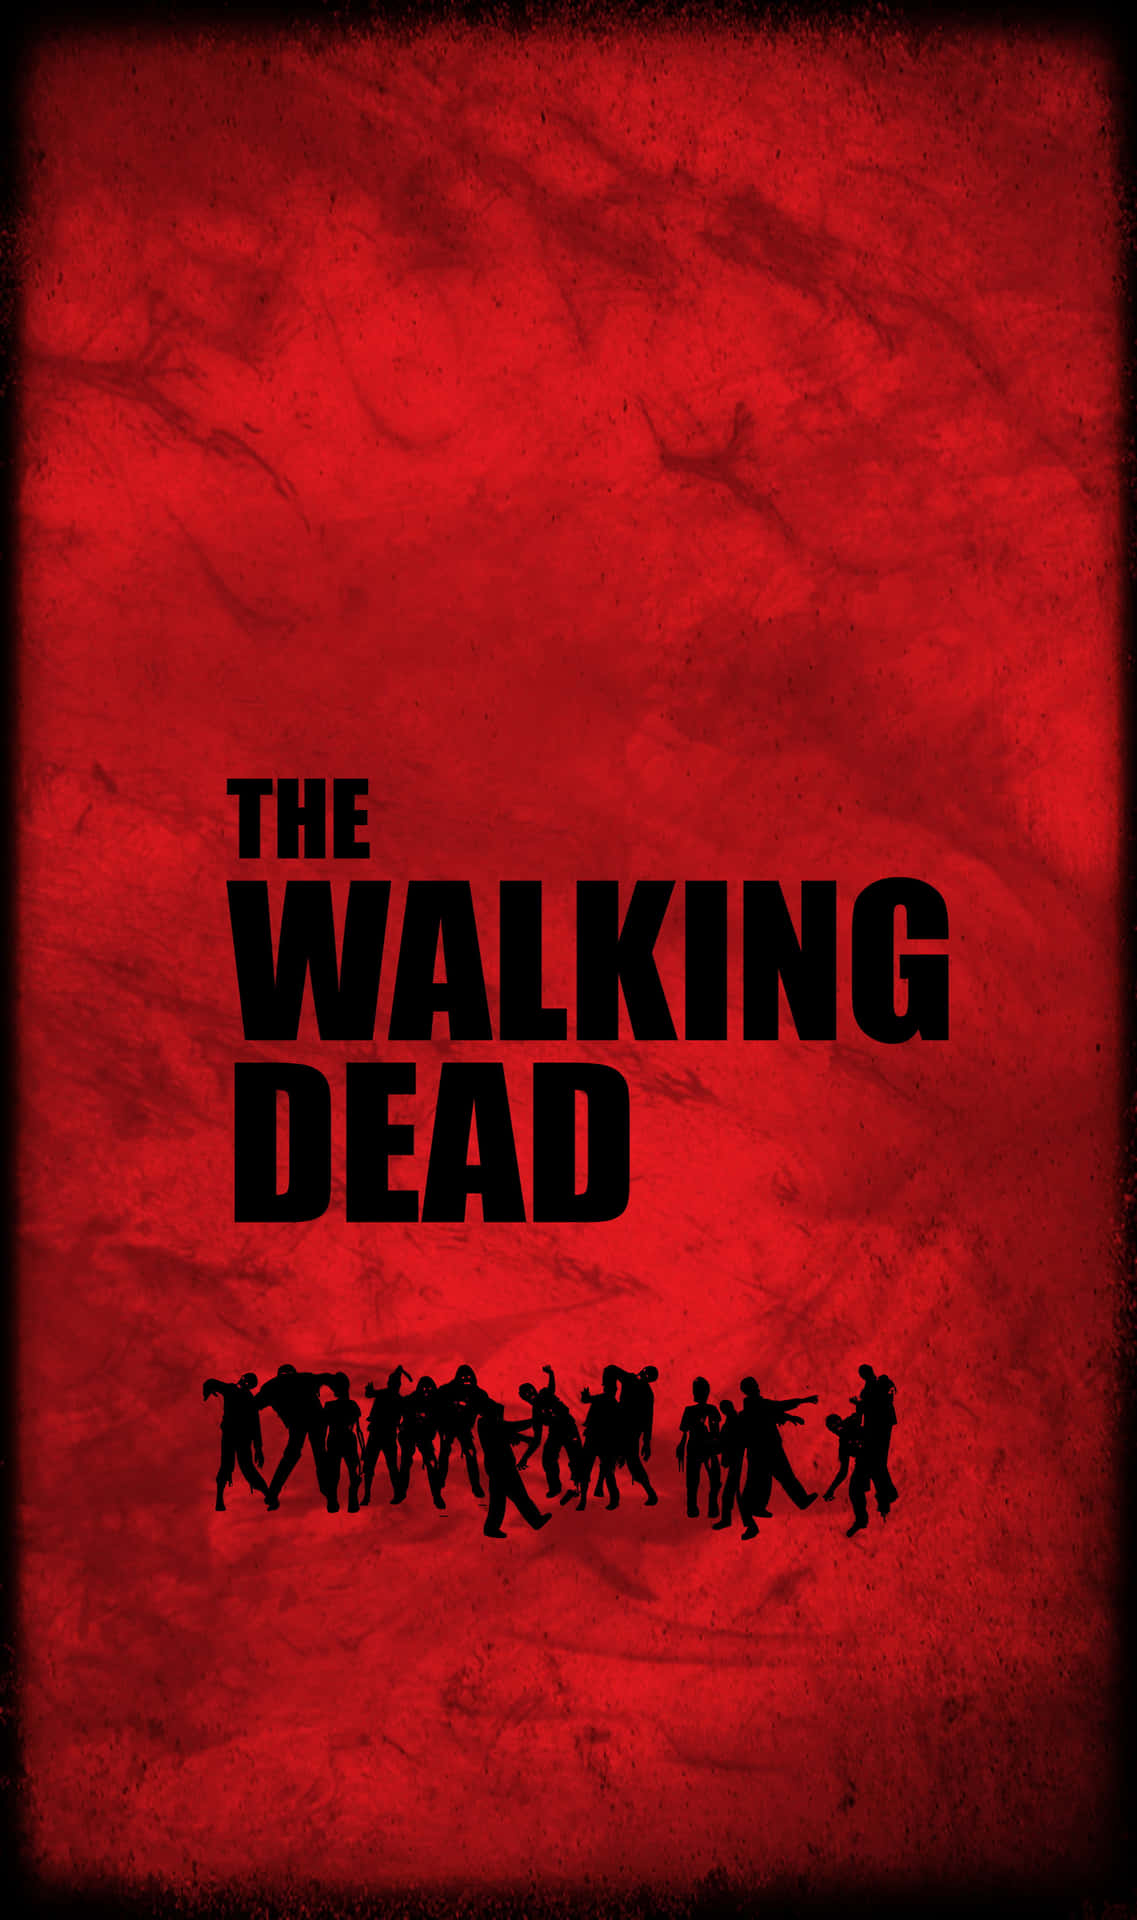 Get ready for the zombie apocalypse with the new The Walking Dead iPhone Wallpaper